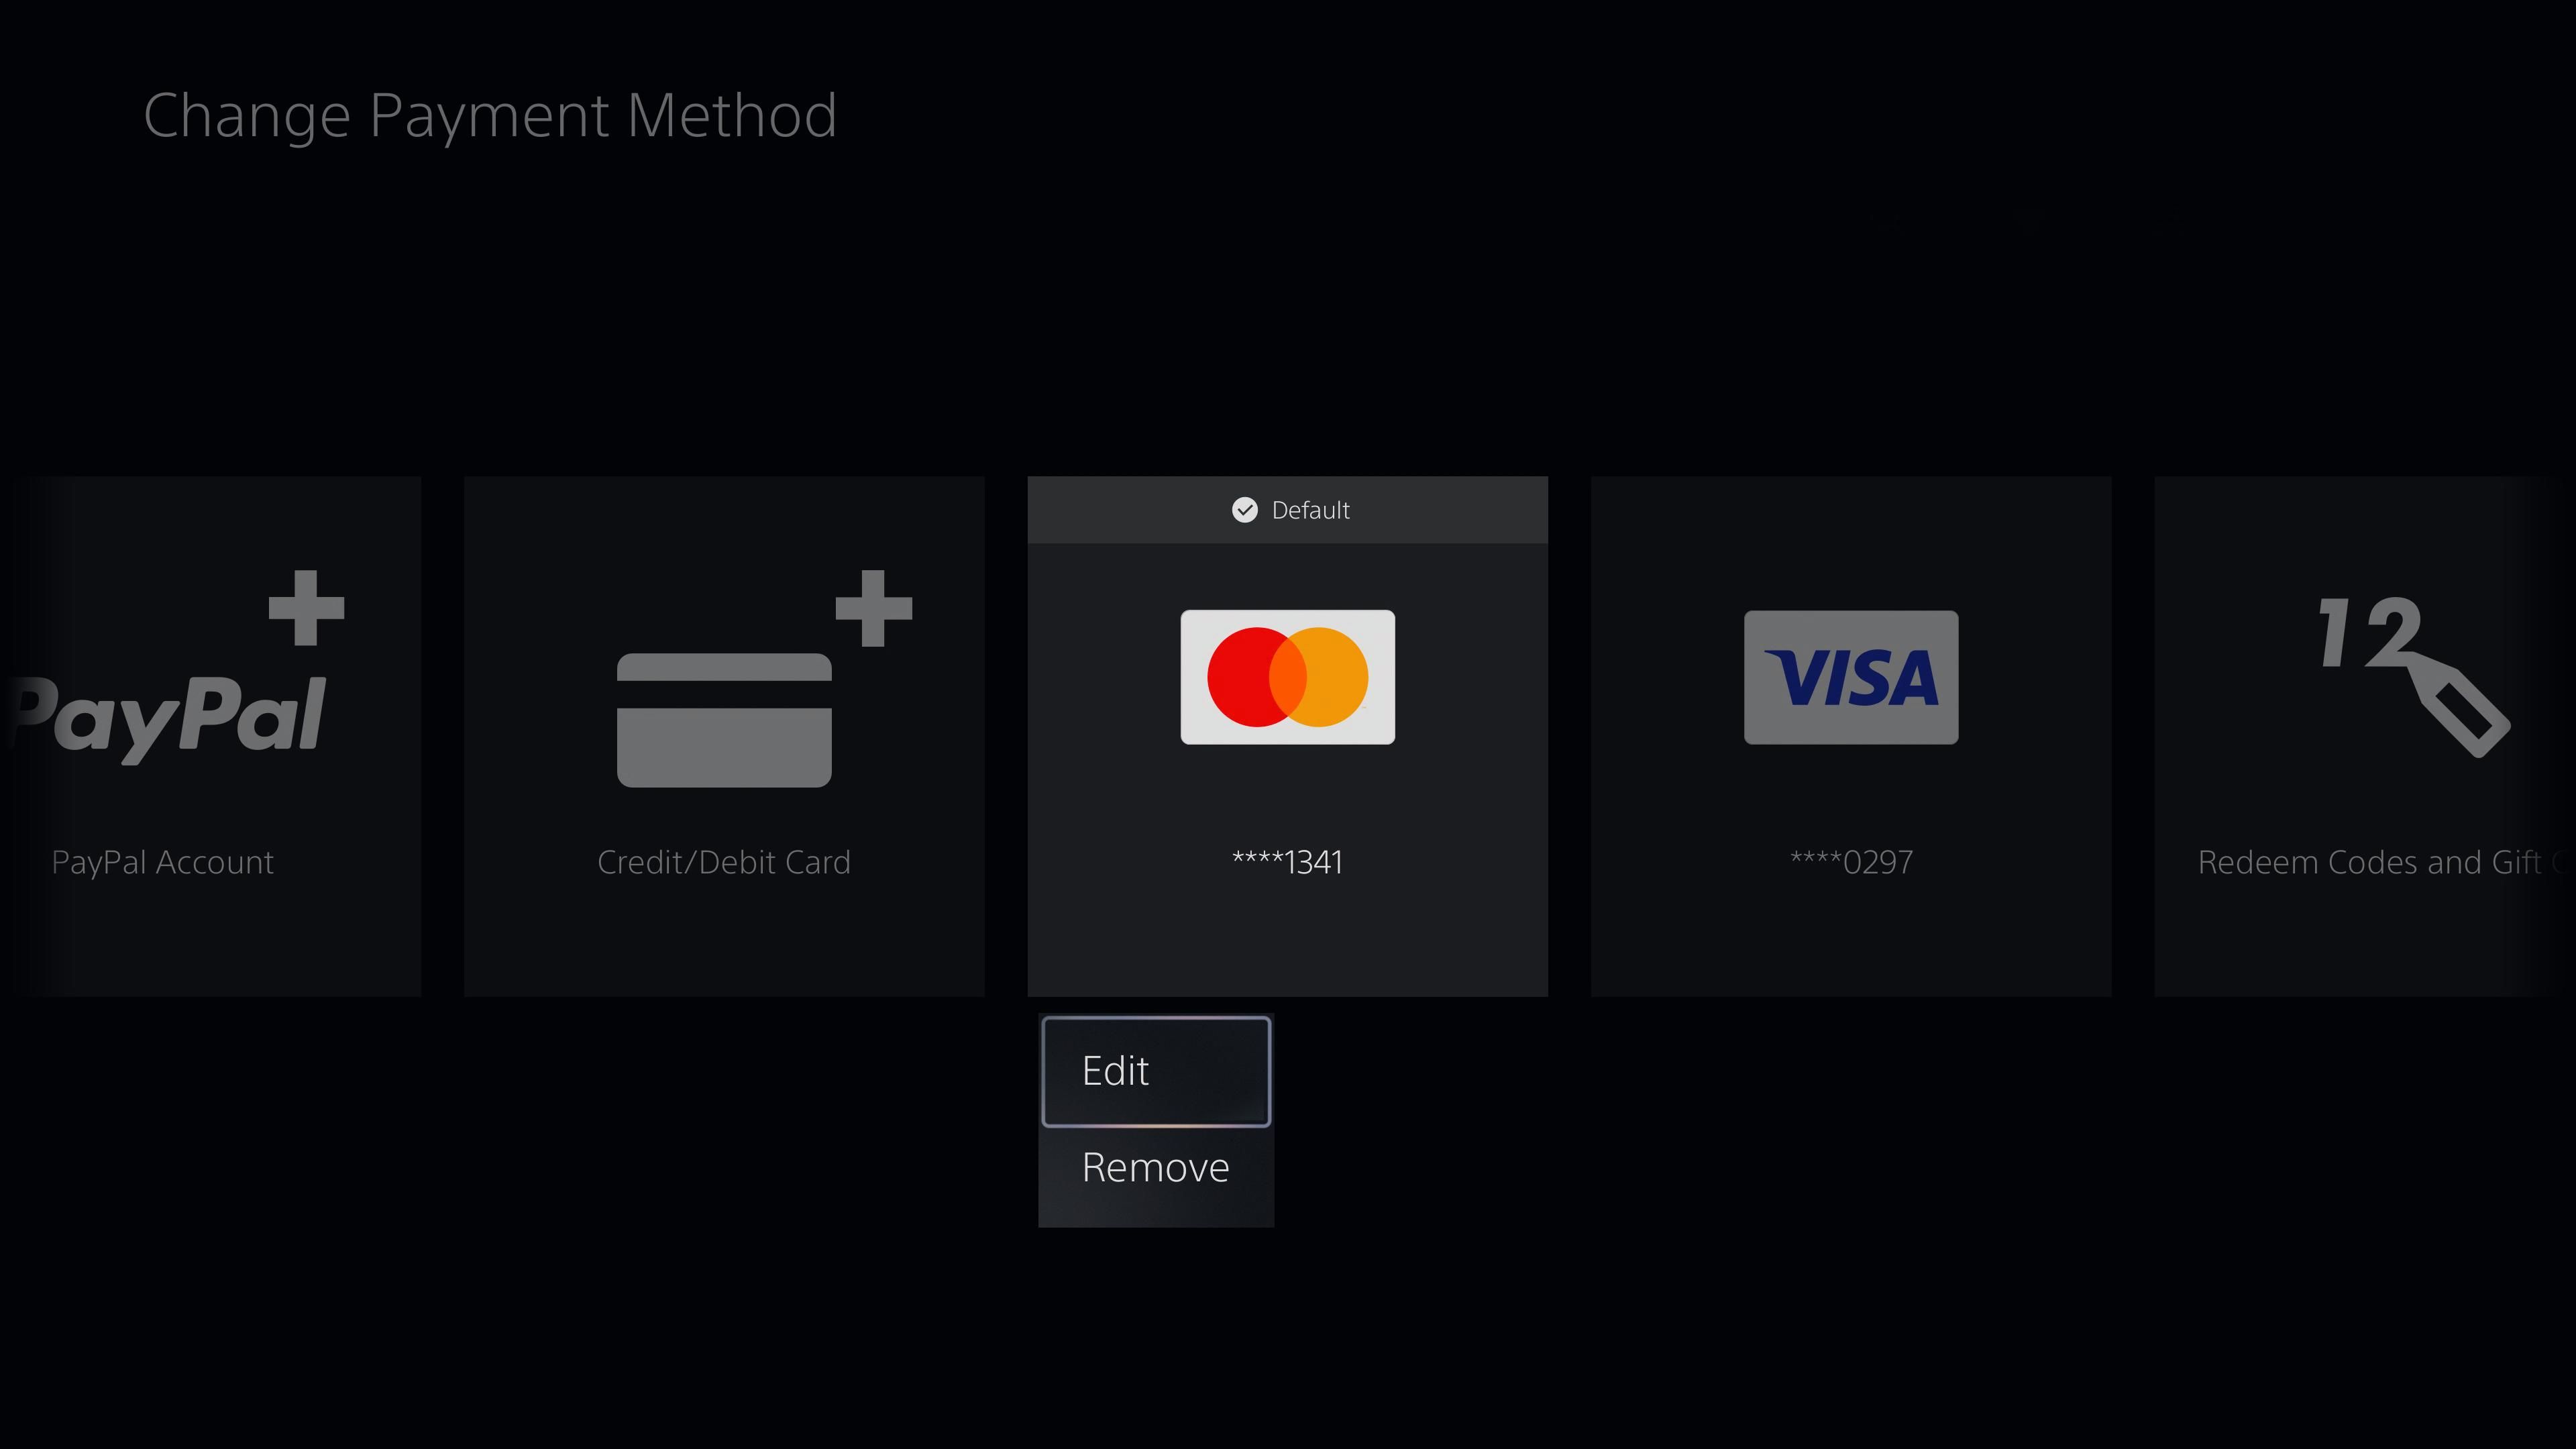 Edit payment method in Change Payment Method page on the PS5